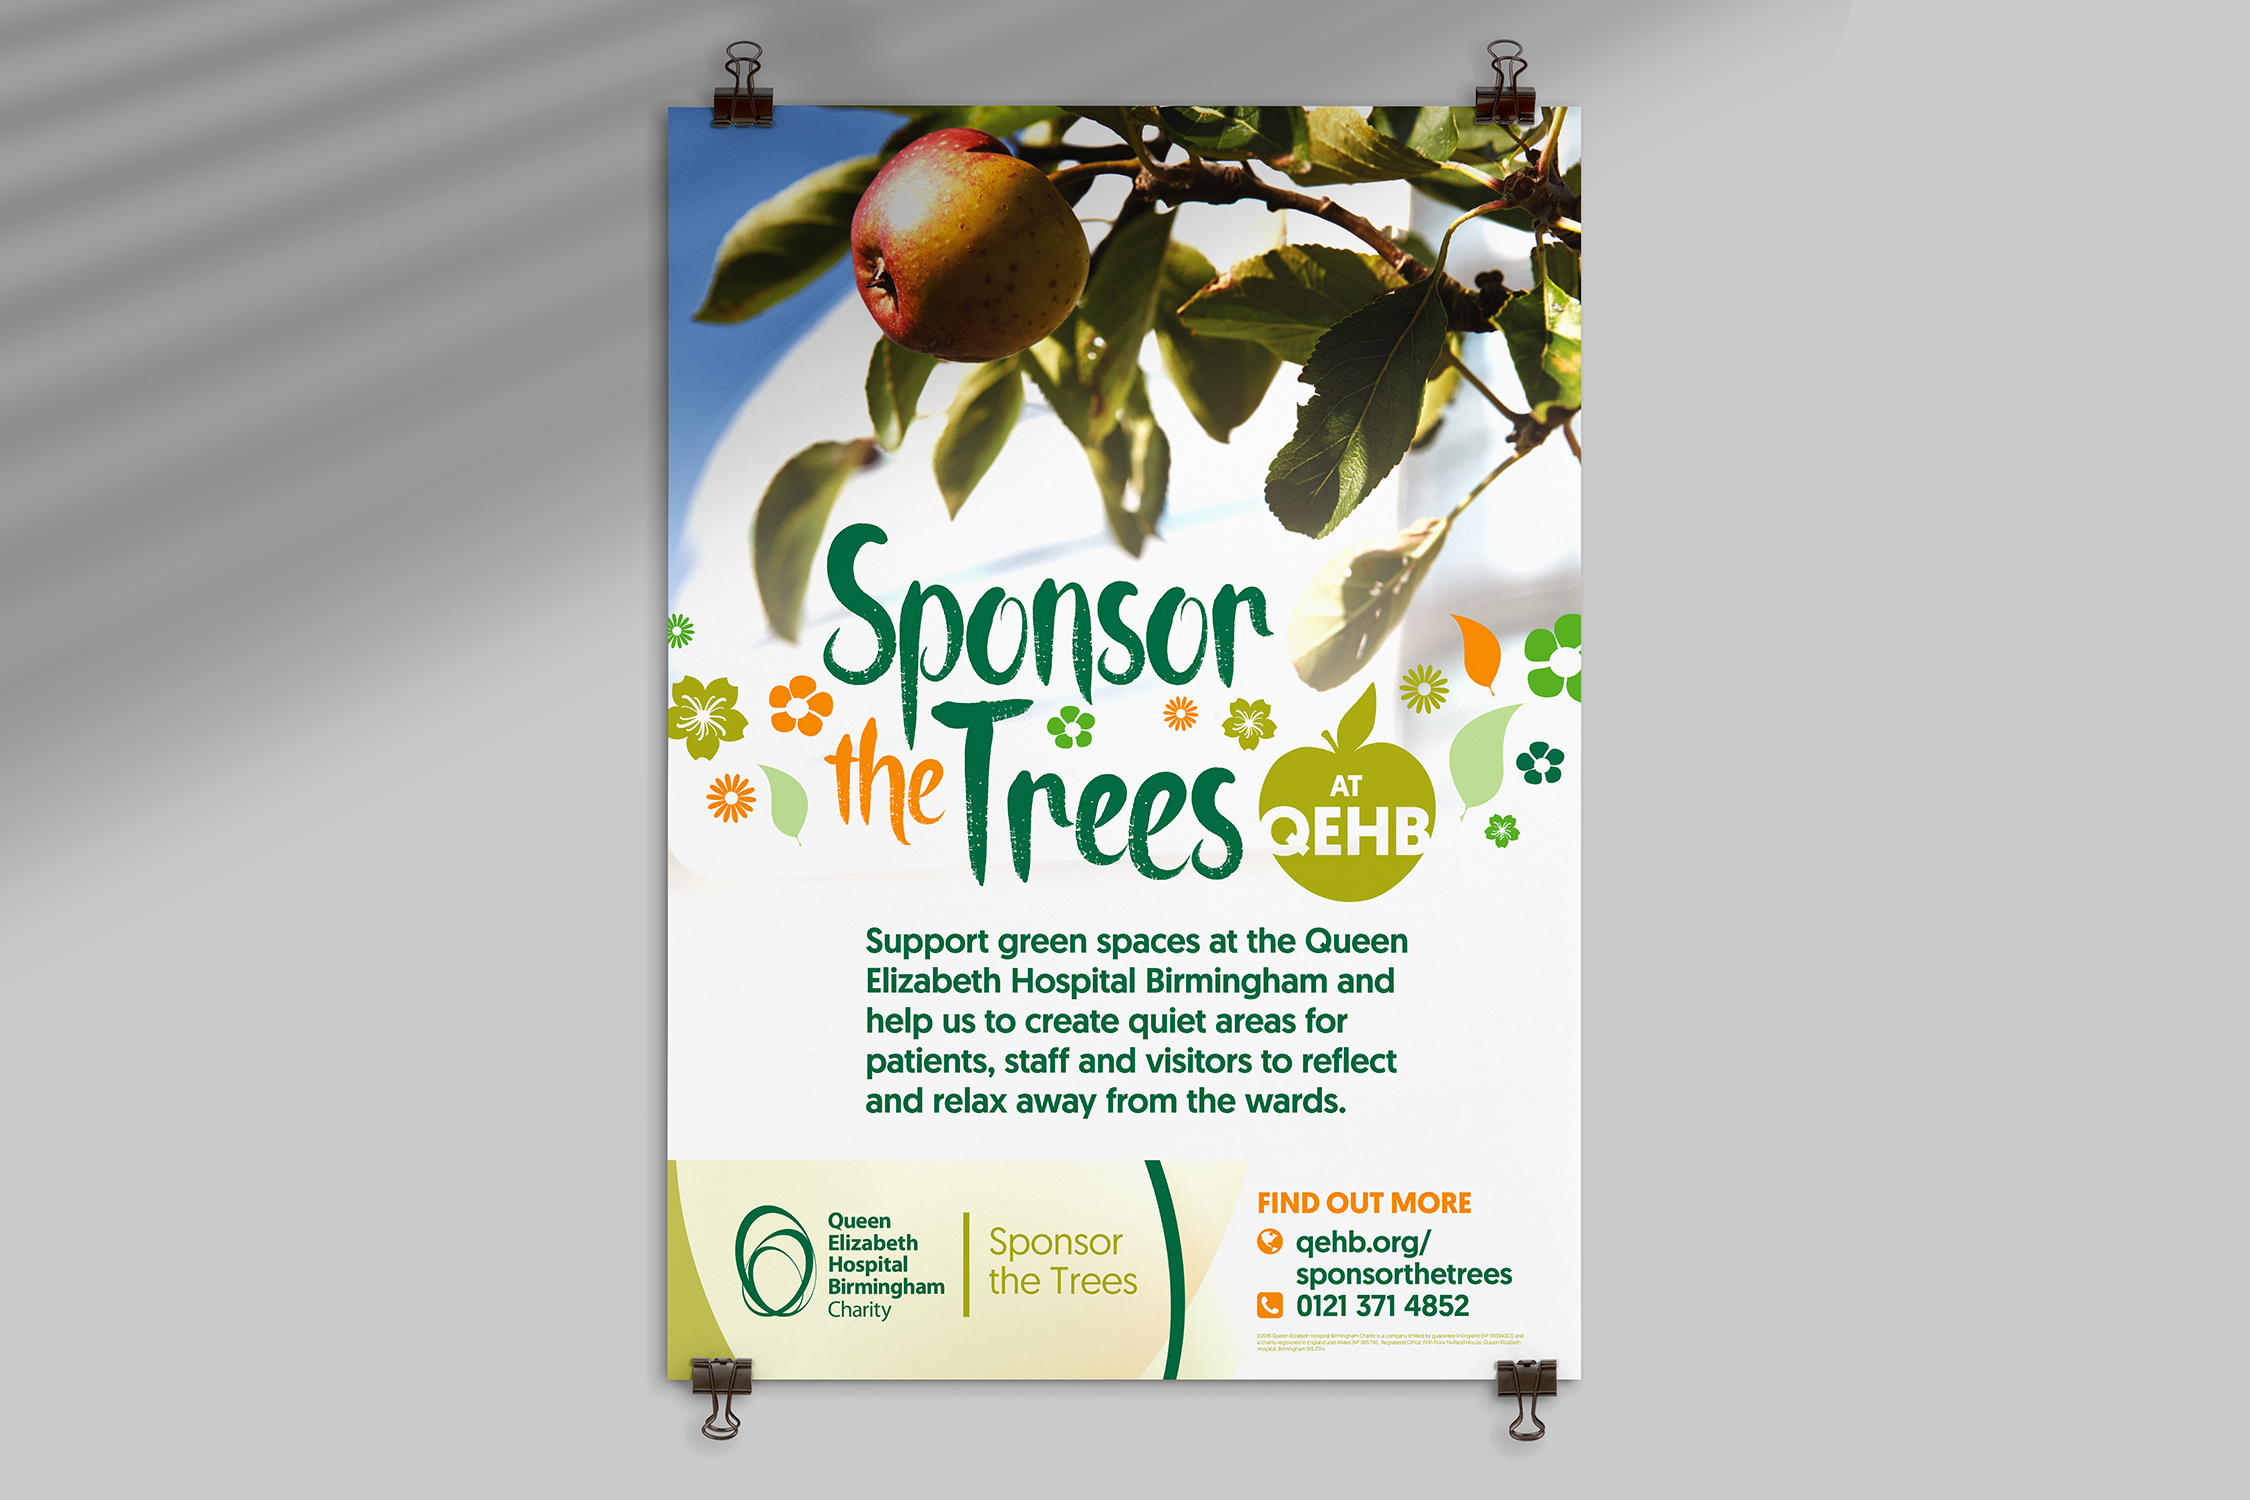 An A1 poster is clipped to a neutral grey wall. The poster shows a red apple hanging from a tree, with one of the Queen Elizabeth Hospital Birmingham's towers blurred in the background. Under the image the words 'Sponsor the trees at QEHB' are displayed in a playful handwritten font intermixed with images of flowers and fruit.